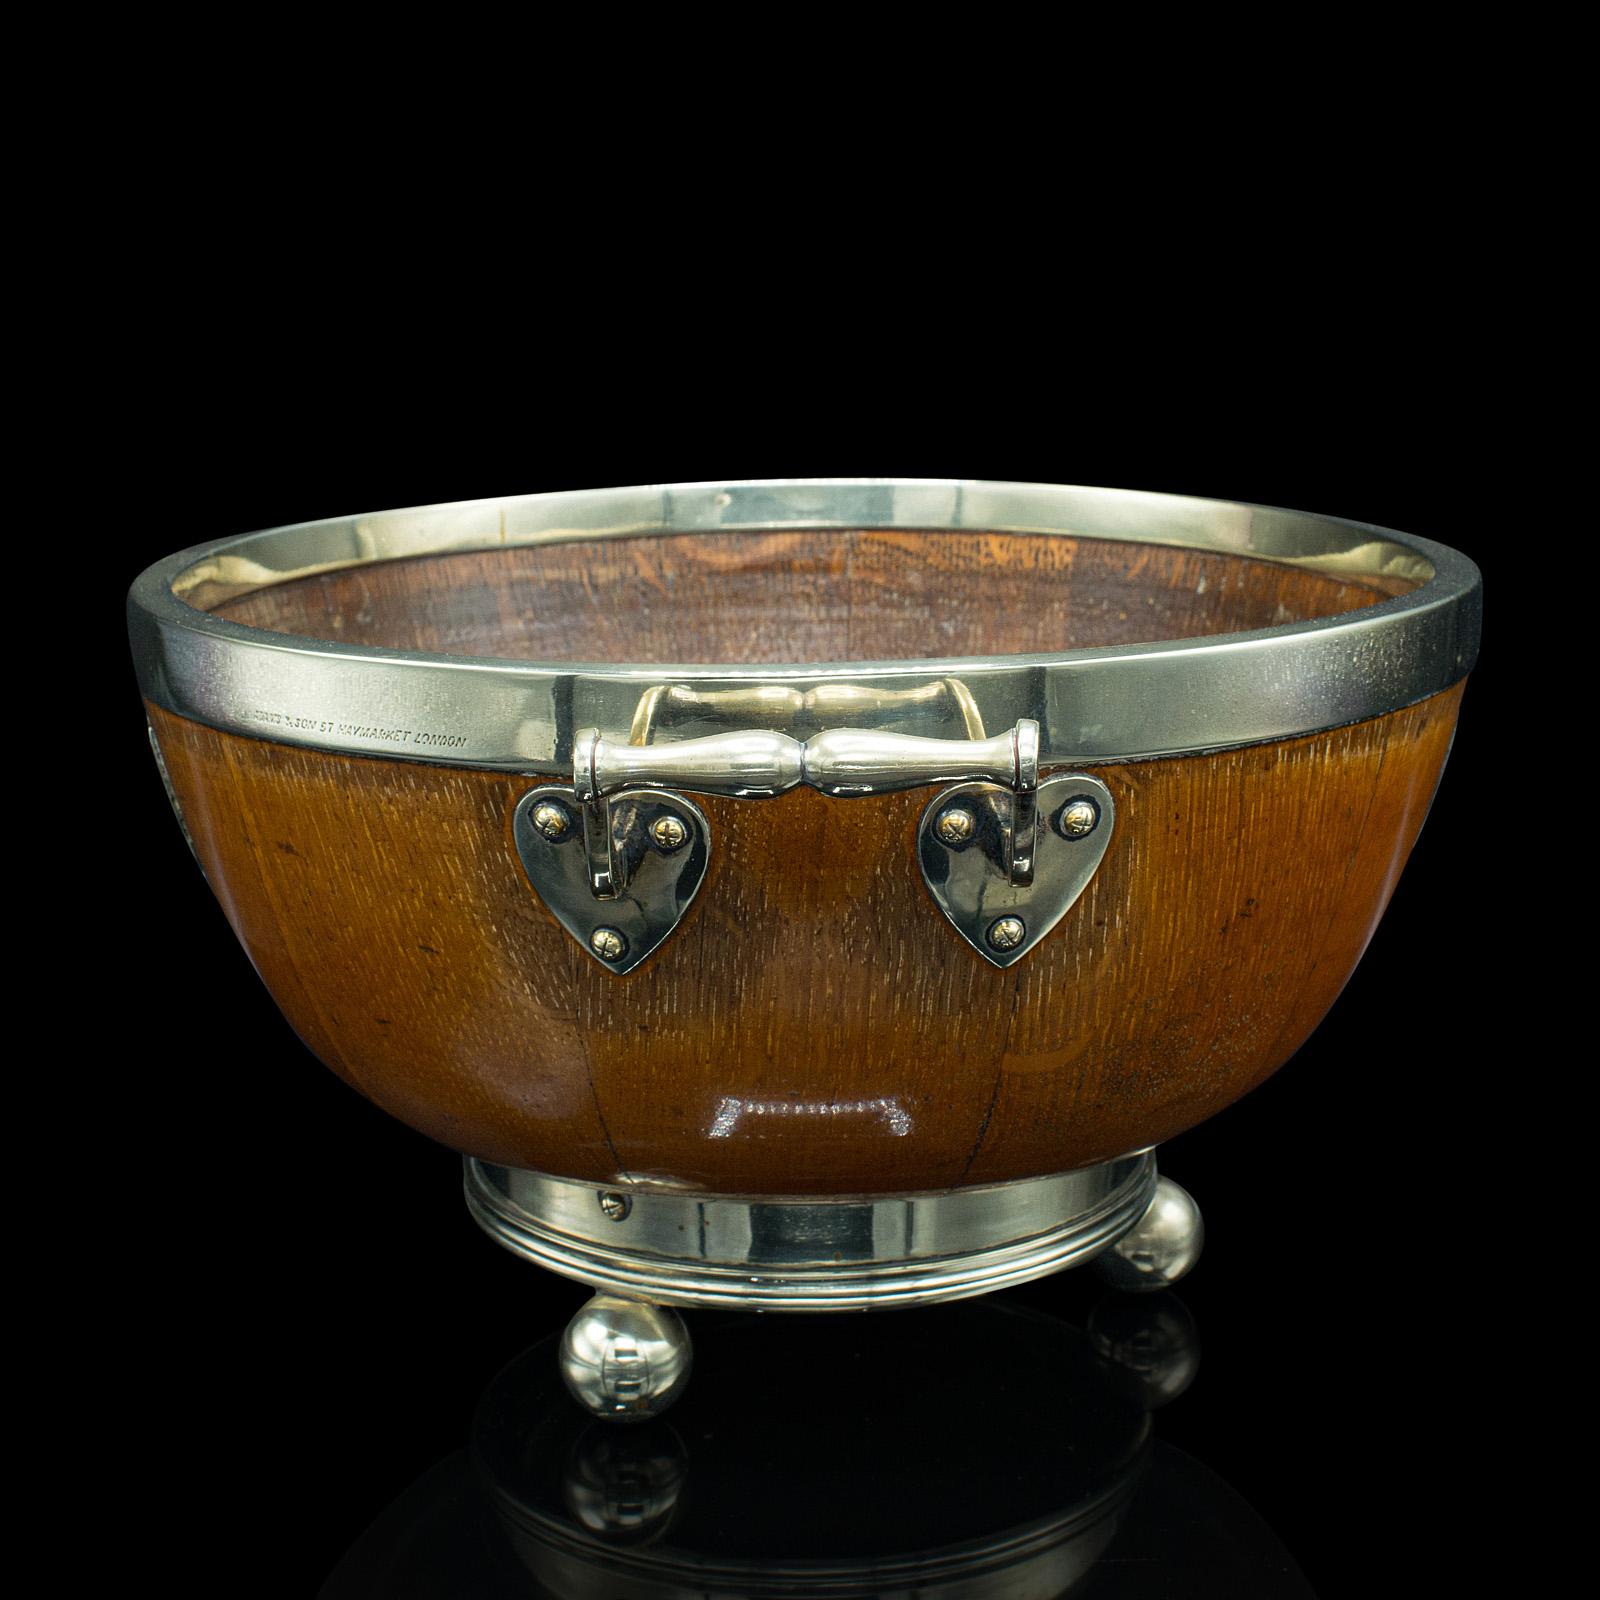 British Antique Fruit Bowl, English, Oak, Silver Plate, Country House, Dish, Victorian